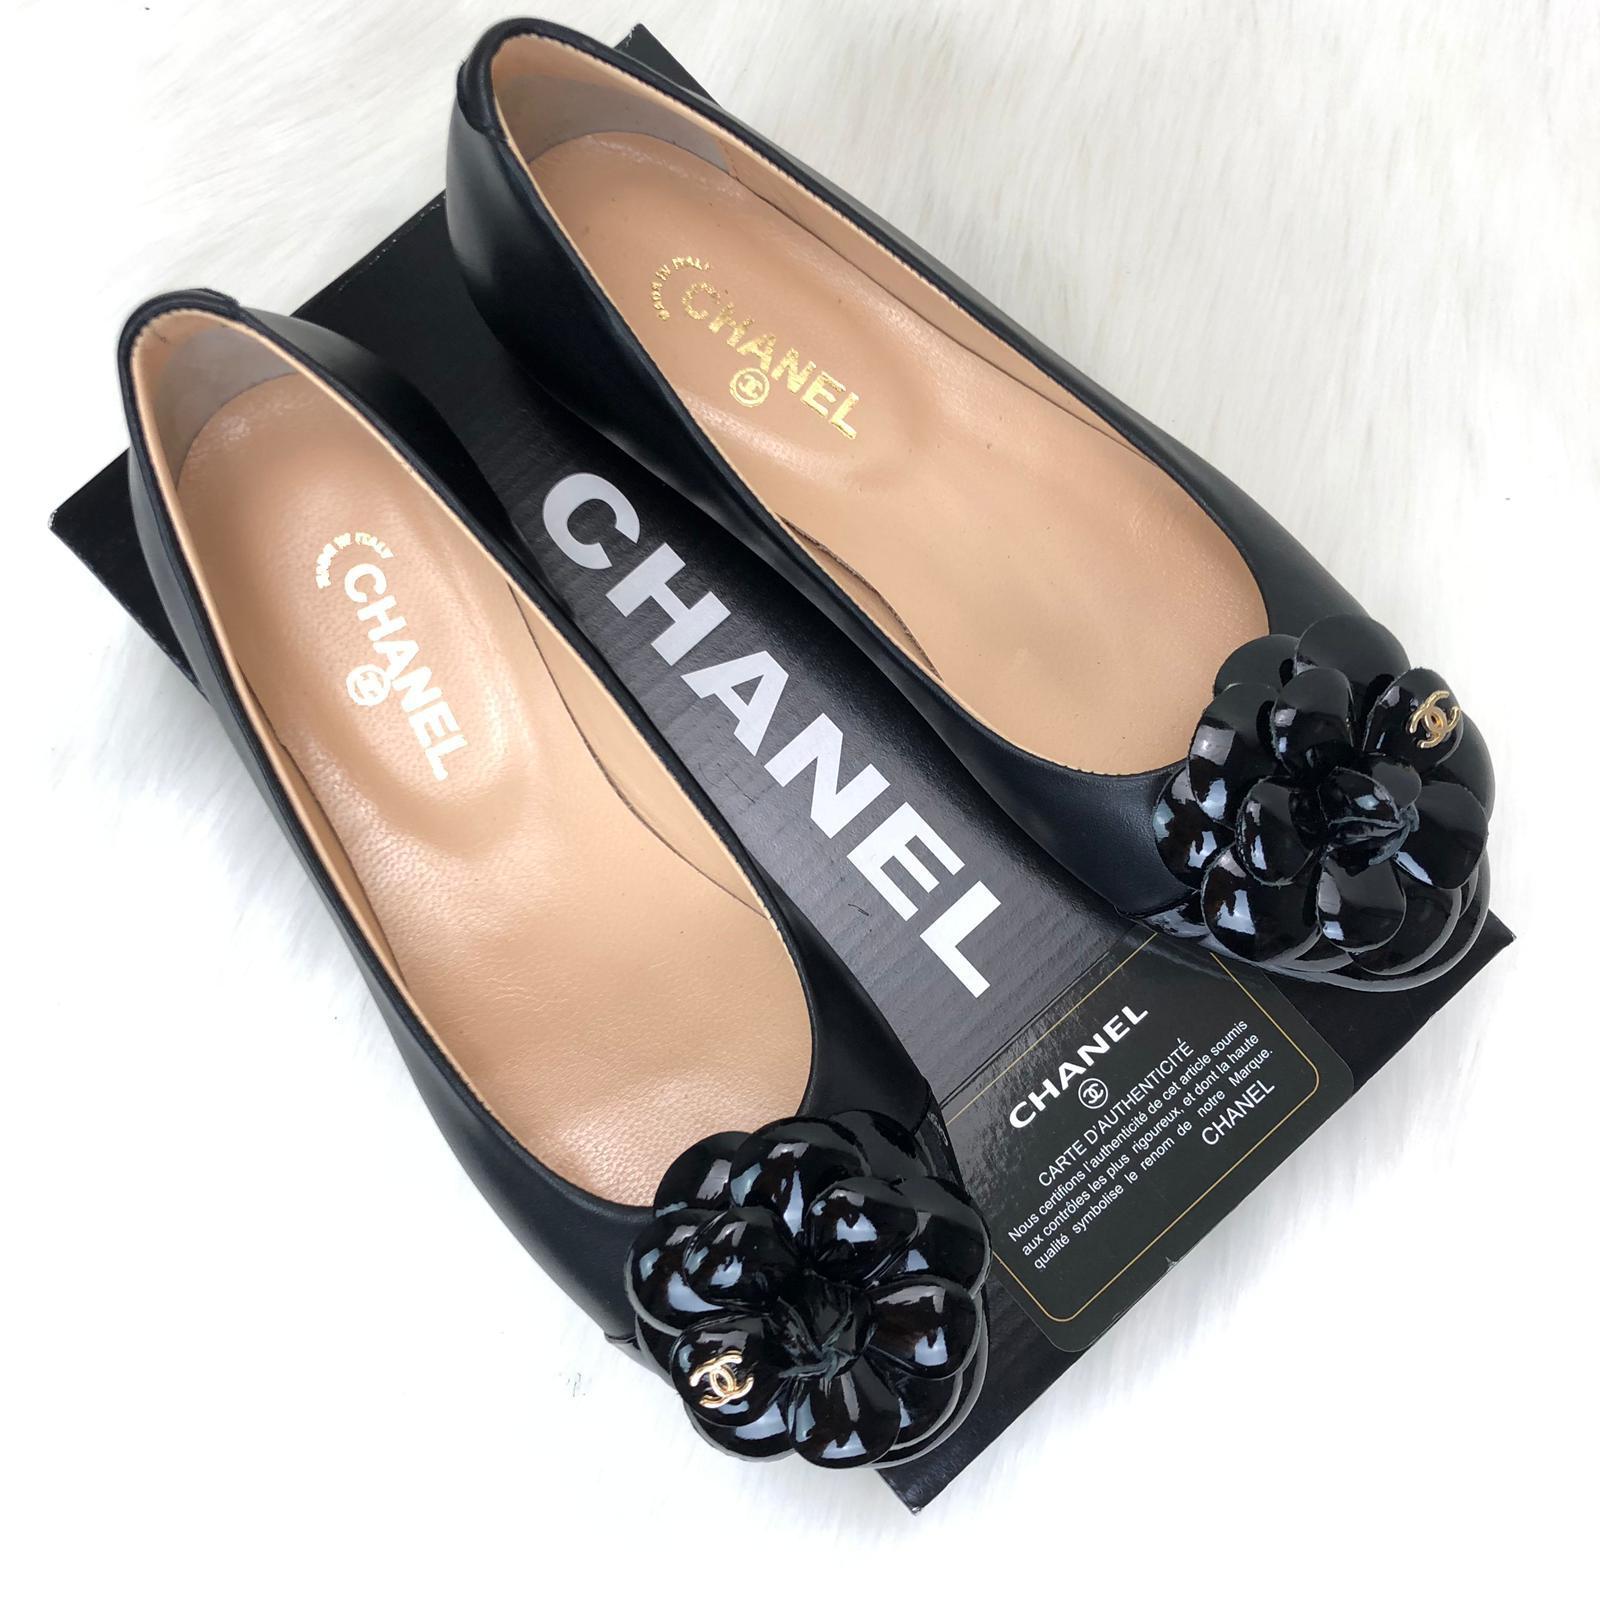 Chanel Camellia Flowers Shoes – Fast 